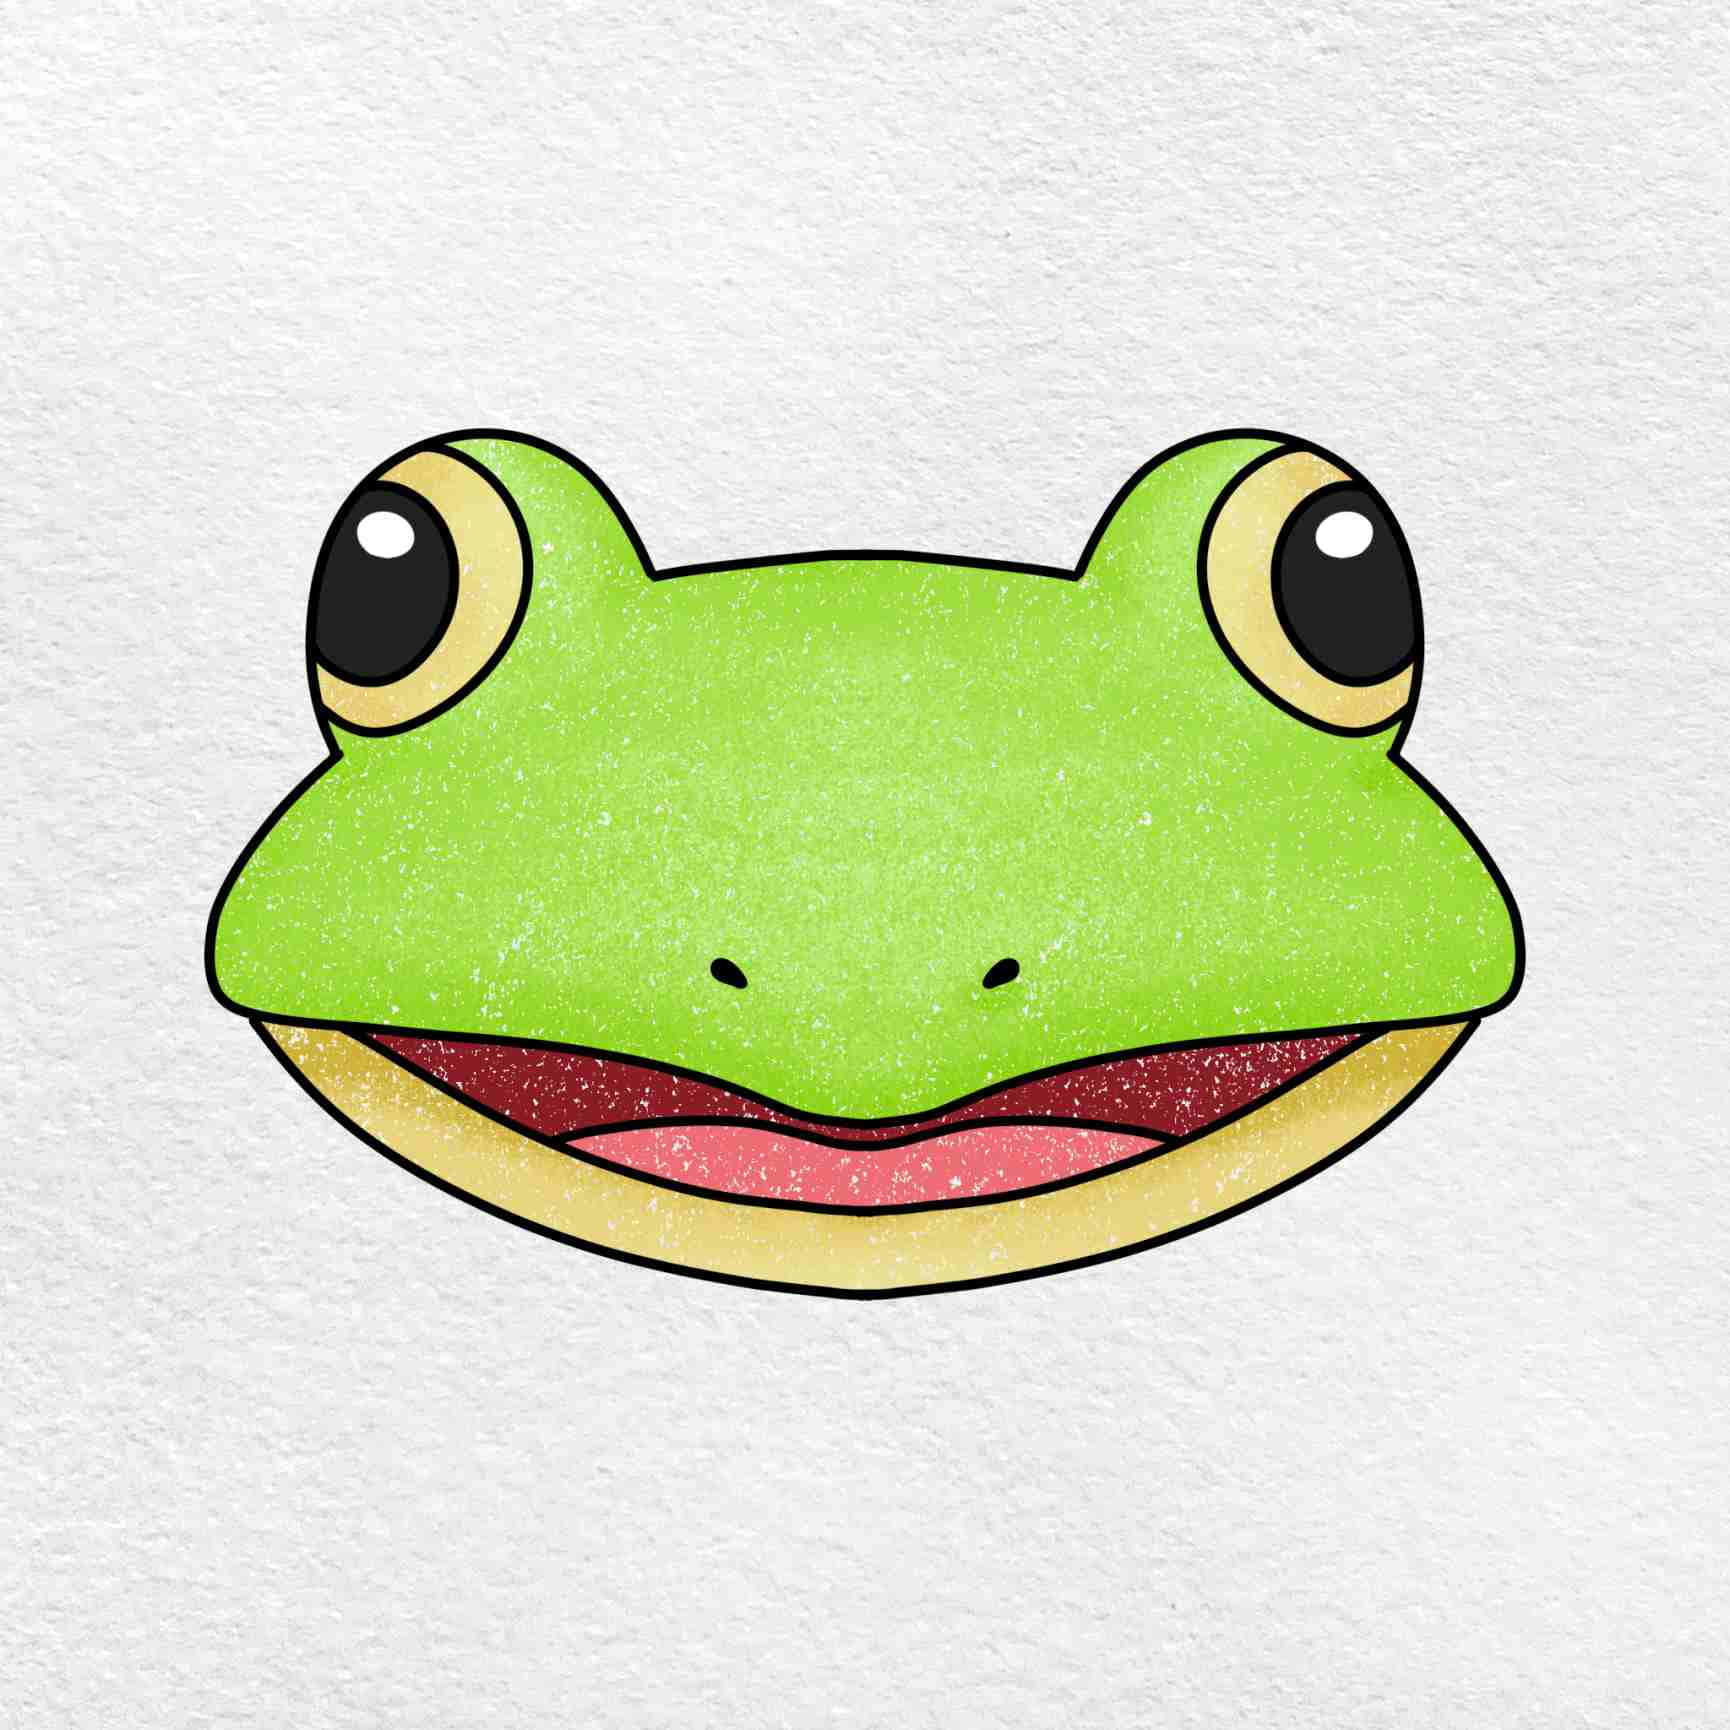 Download A Frog Drawing of a Smiling Amphibian